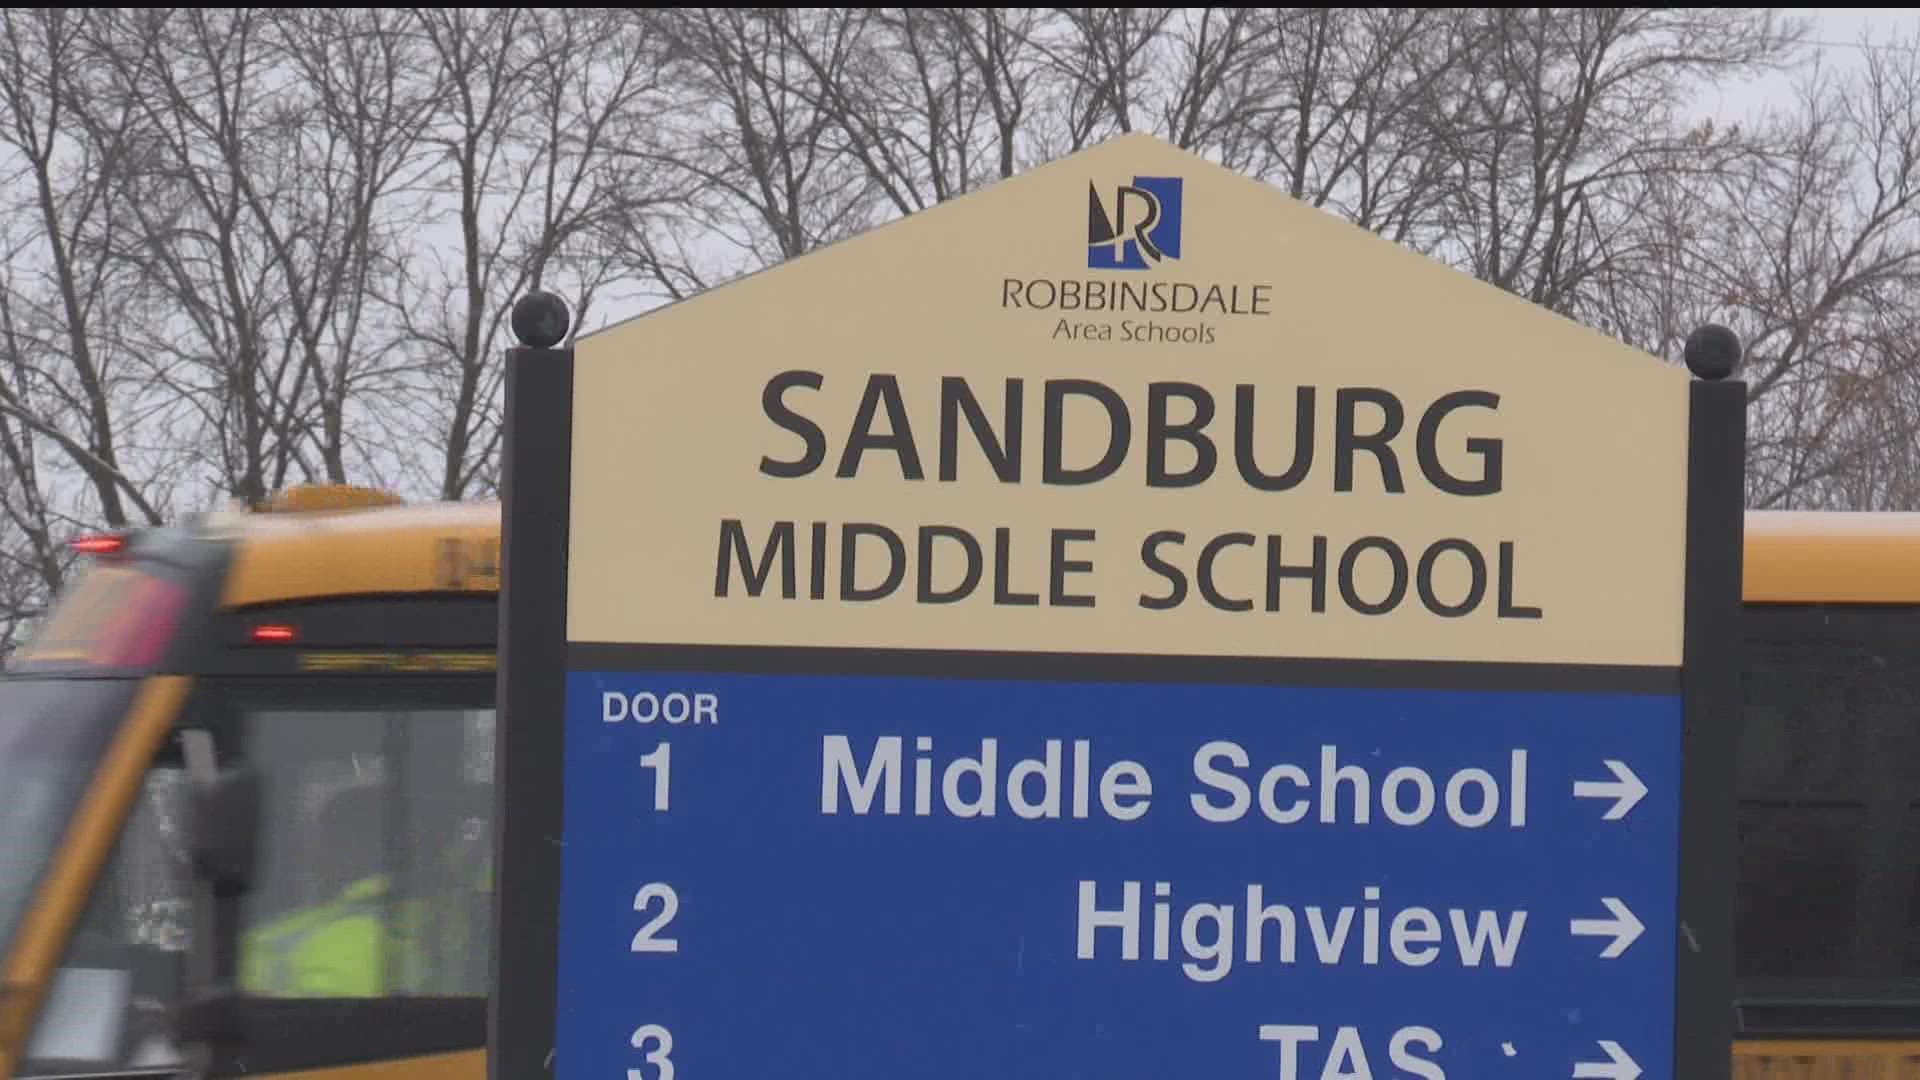 Sandburg Middle School officials say a video is circulating on social media that shows a student holding what appears to be a gun in a bathroom.